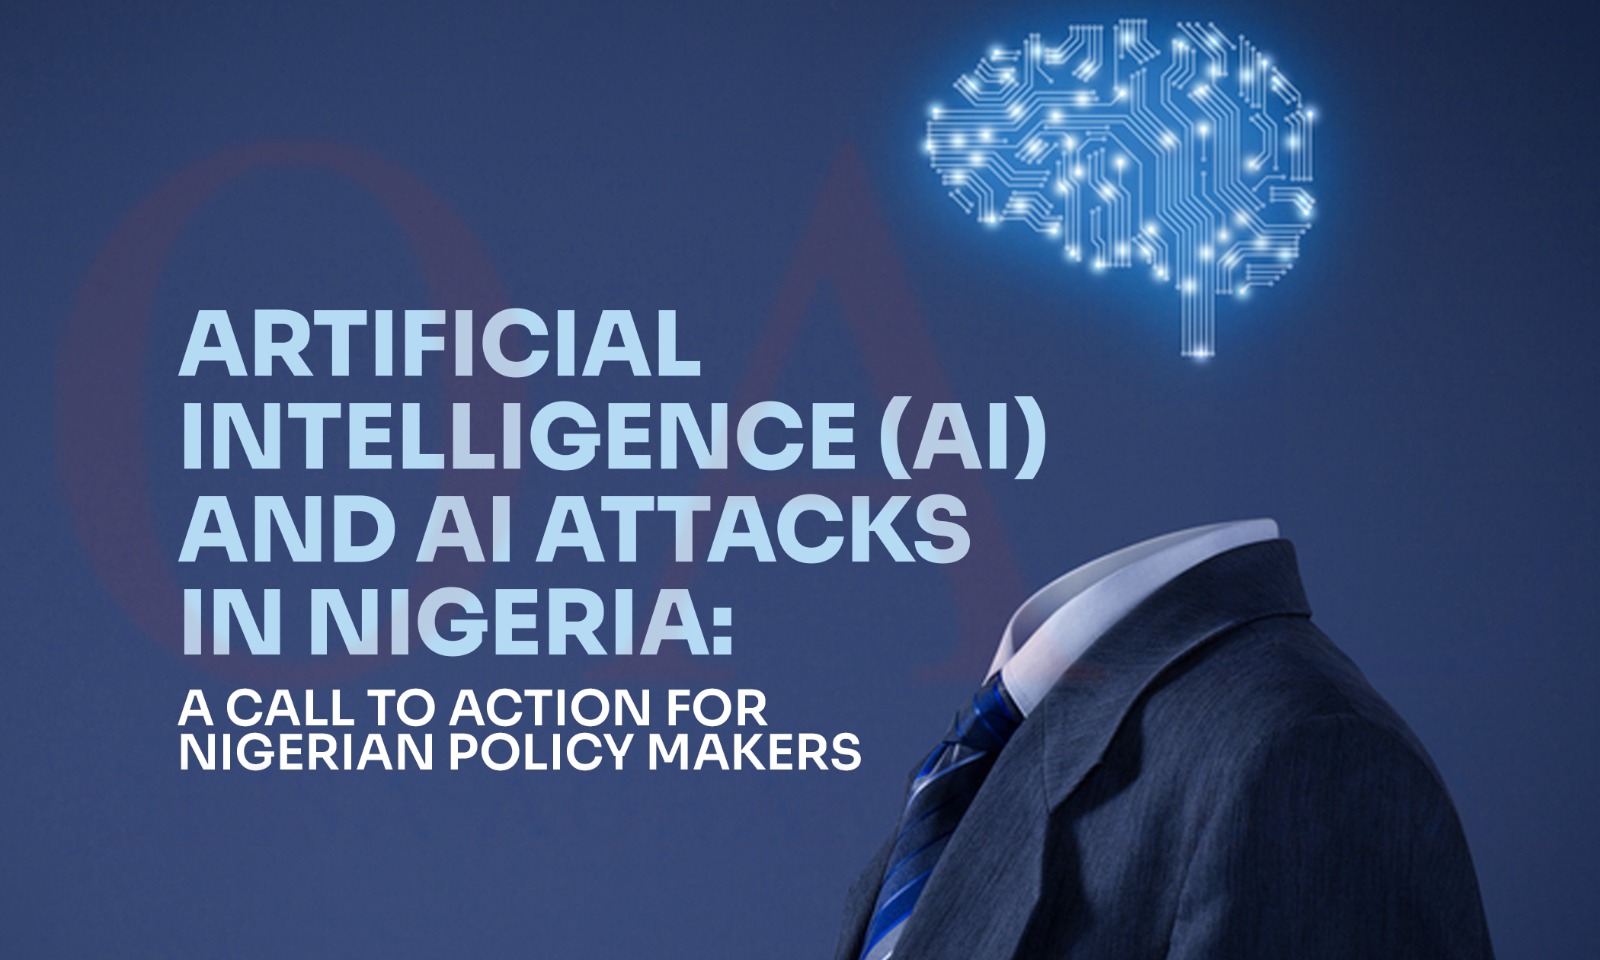 Artificial Intelligence (AI) and AI Attacks in Nigeria. A call to Action for Nigerian Policy Makers